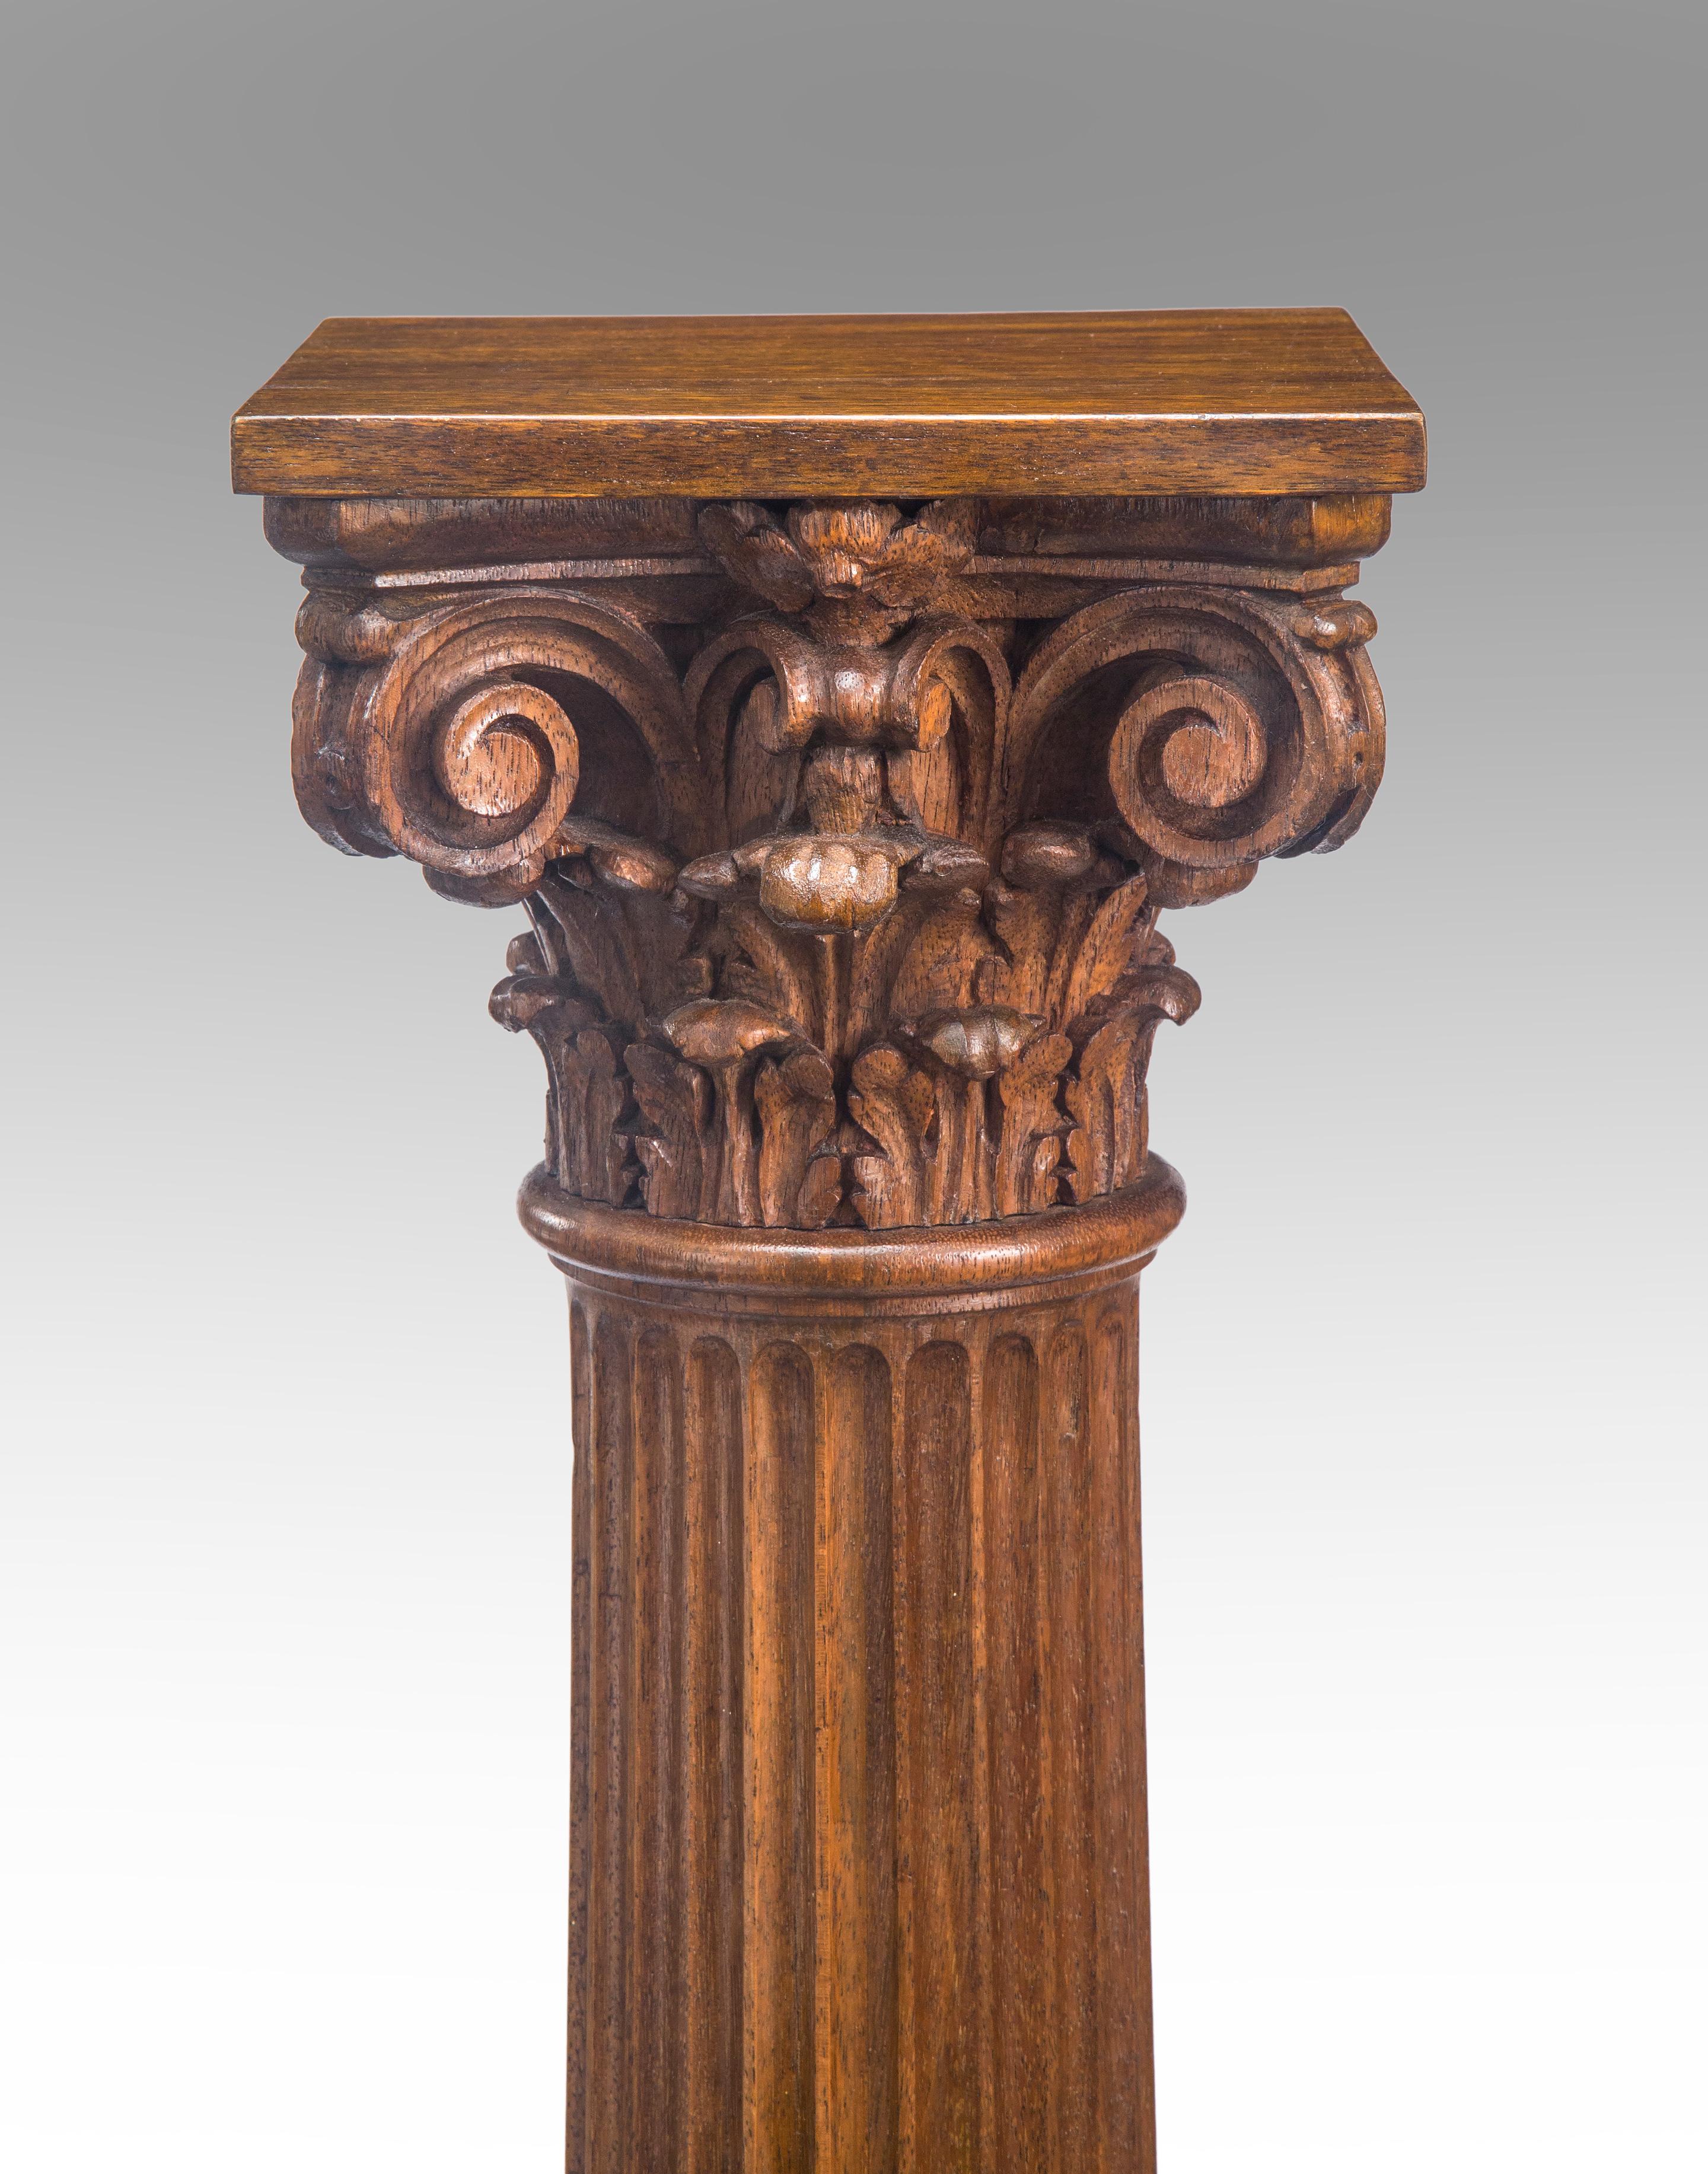 American Classical column oak pedestal
19th century.
Expertly carved column / pedestal of harmonious proportions is an handsome accent piece or a useful pedestal. The carved Corinthian capital below a level display surface, the fluted column above